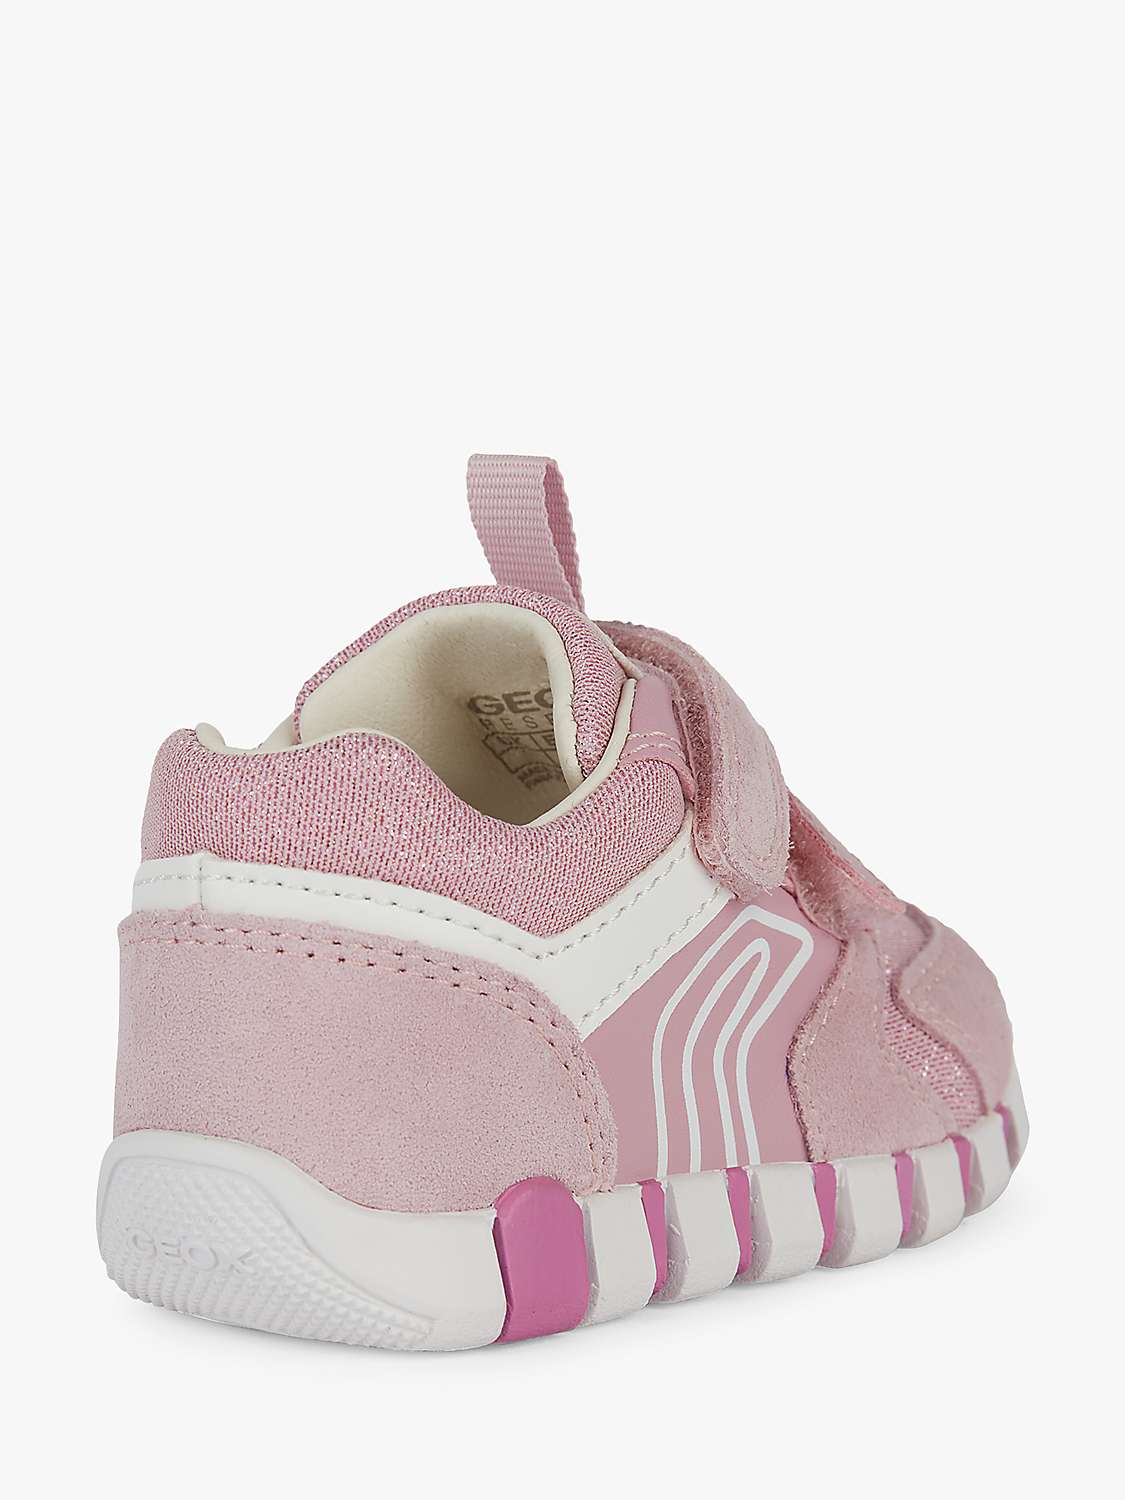 Buy Geox Kids' Iupidoo Leather Blend Pre-Walker Trainers, Rose/White Online at johnlewis.com